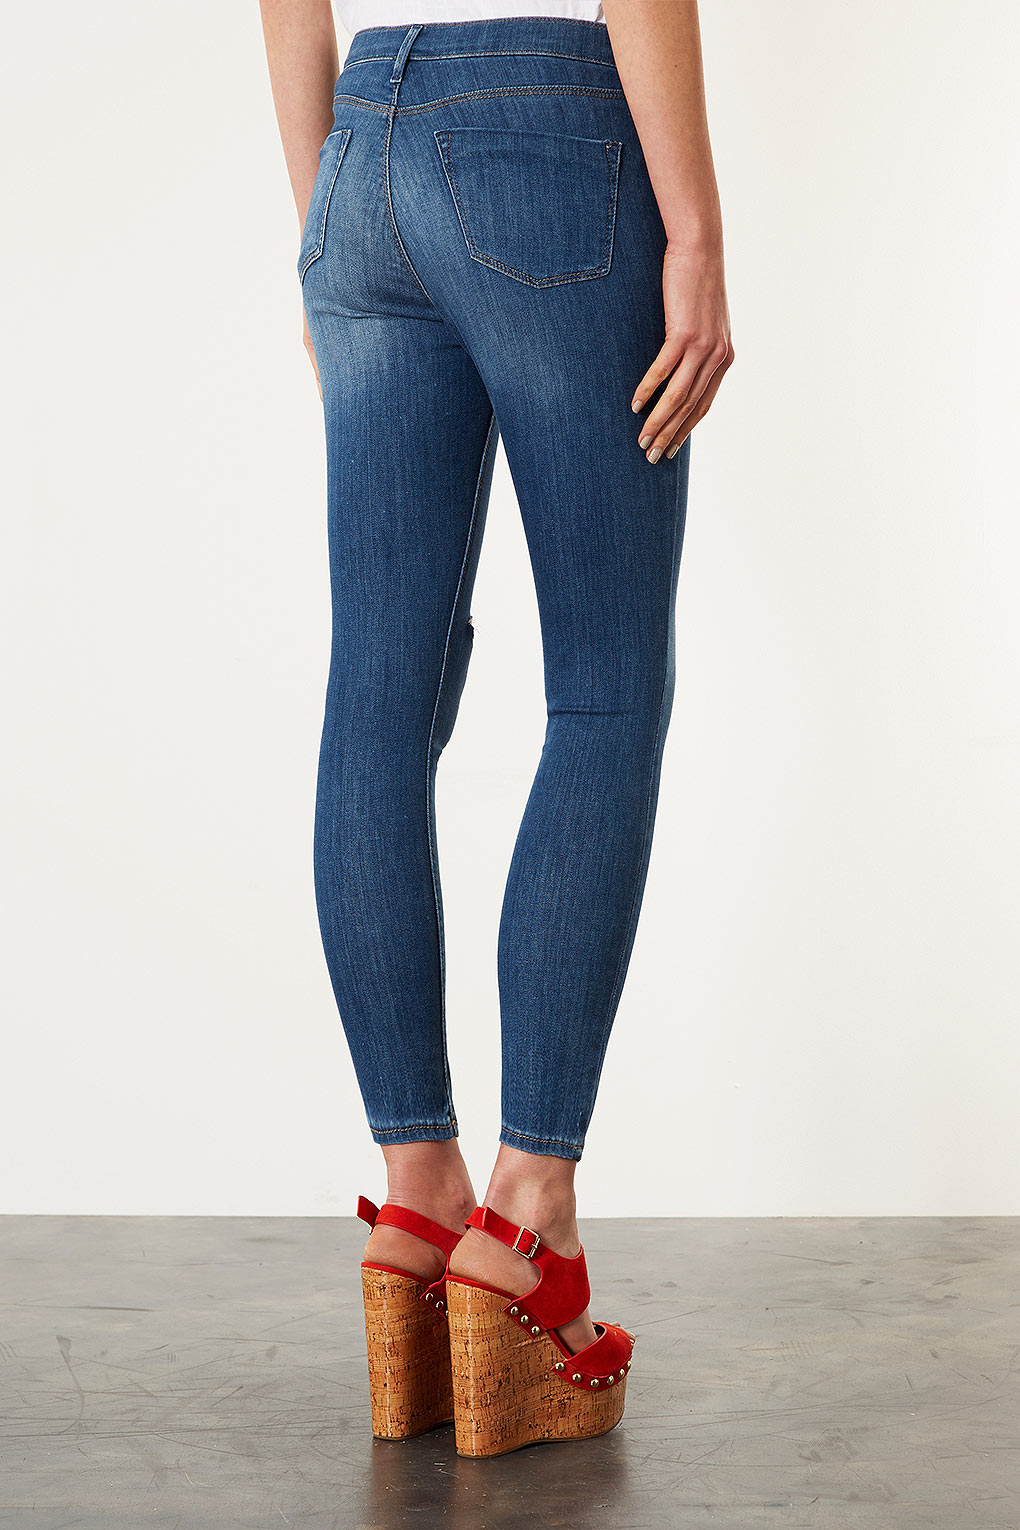 Lyst - Topshop Blue Ripped Knee Skinny Jeans in Blue